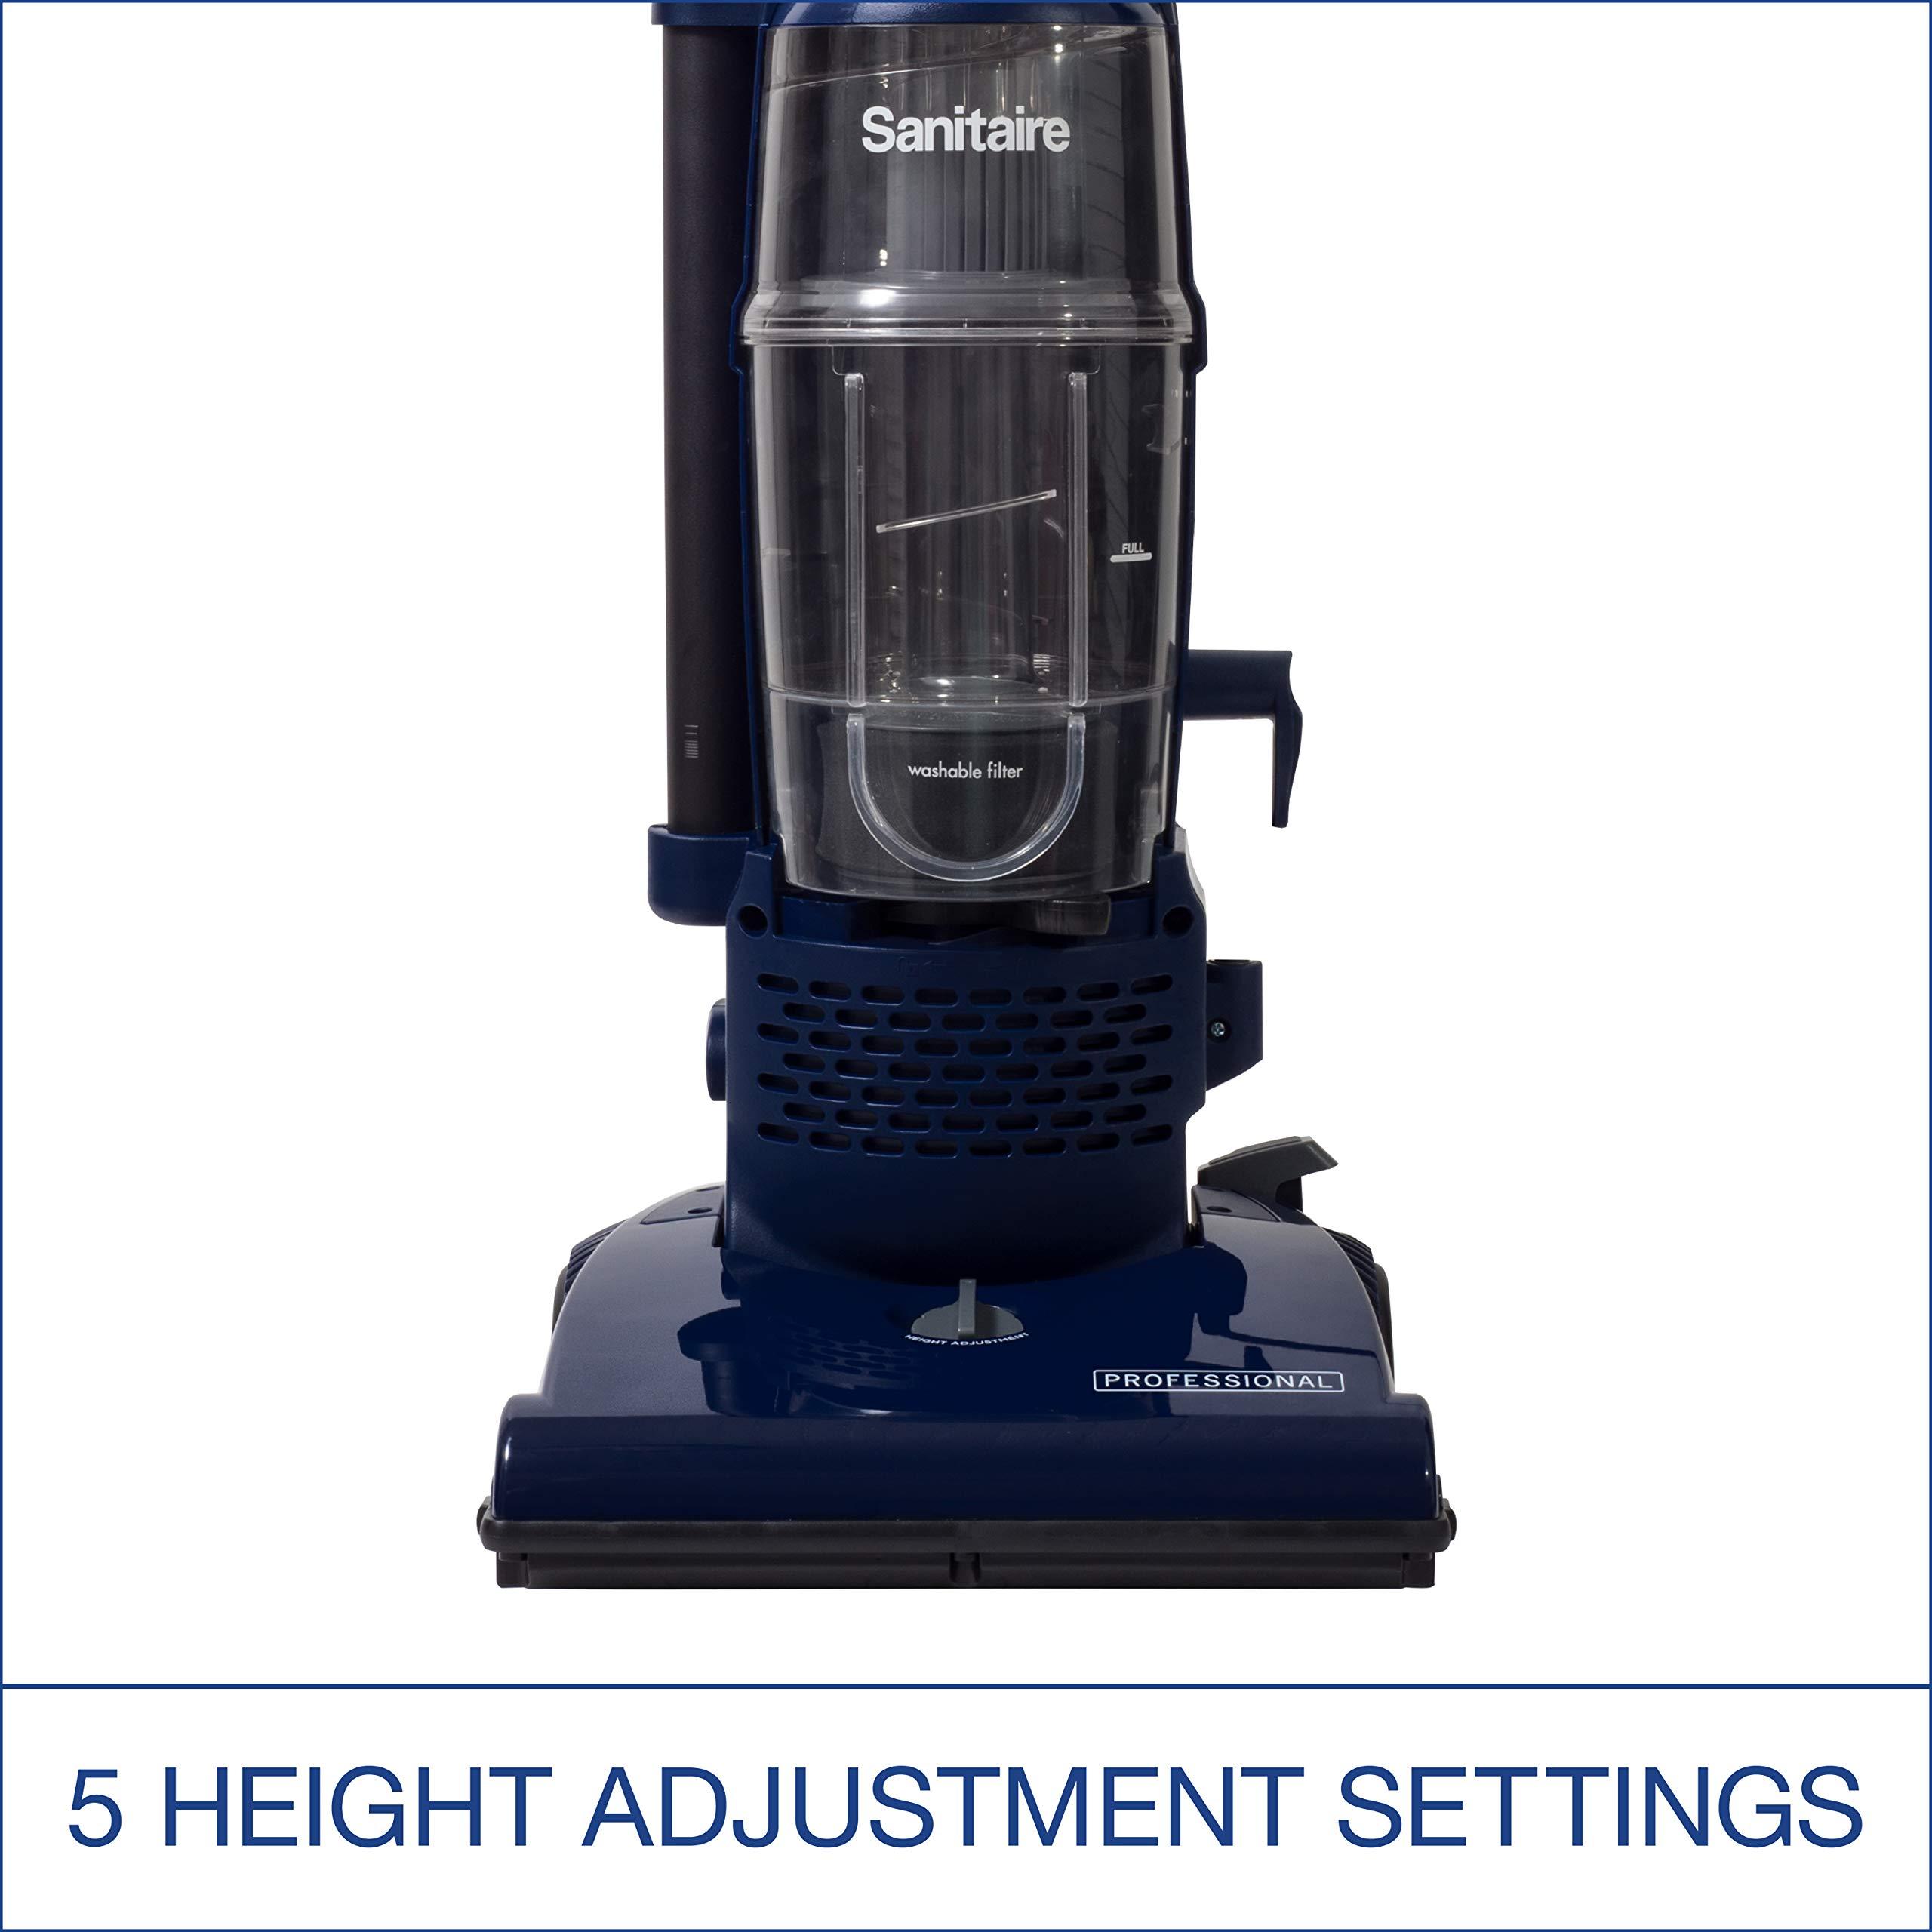 Sanitaire Professional Bagless Upright Commercial Vacuum with Tools, SL4410A - image 4 of 6